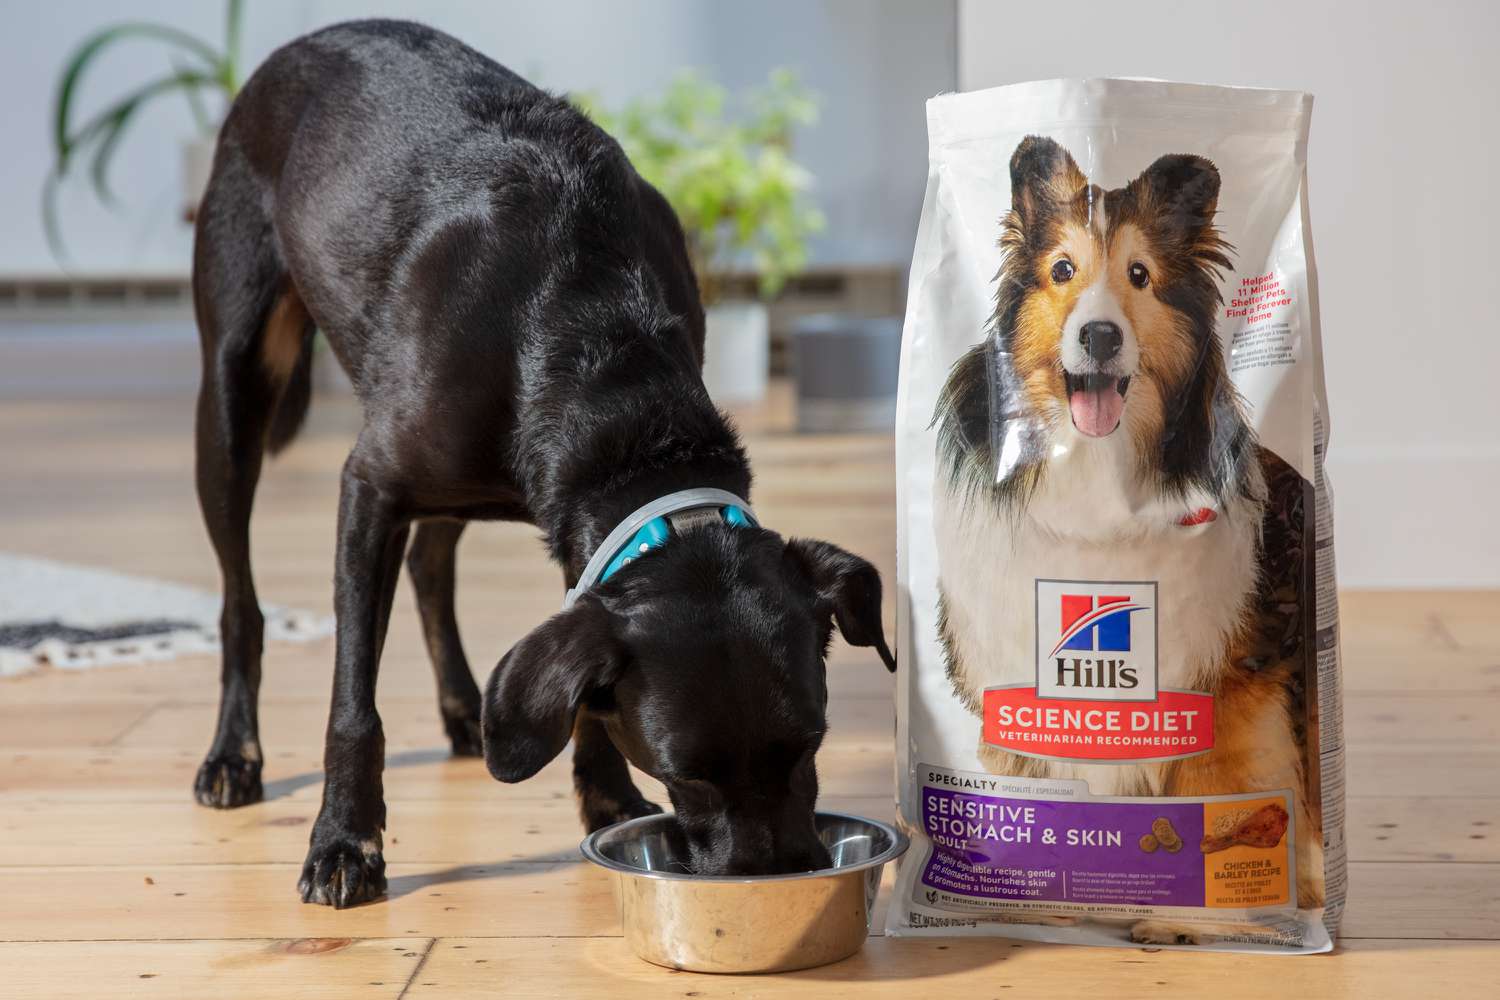 What Is A Good Dog Food For Dogs With Food Allergies?